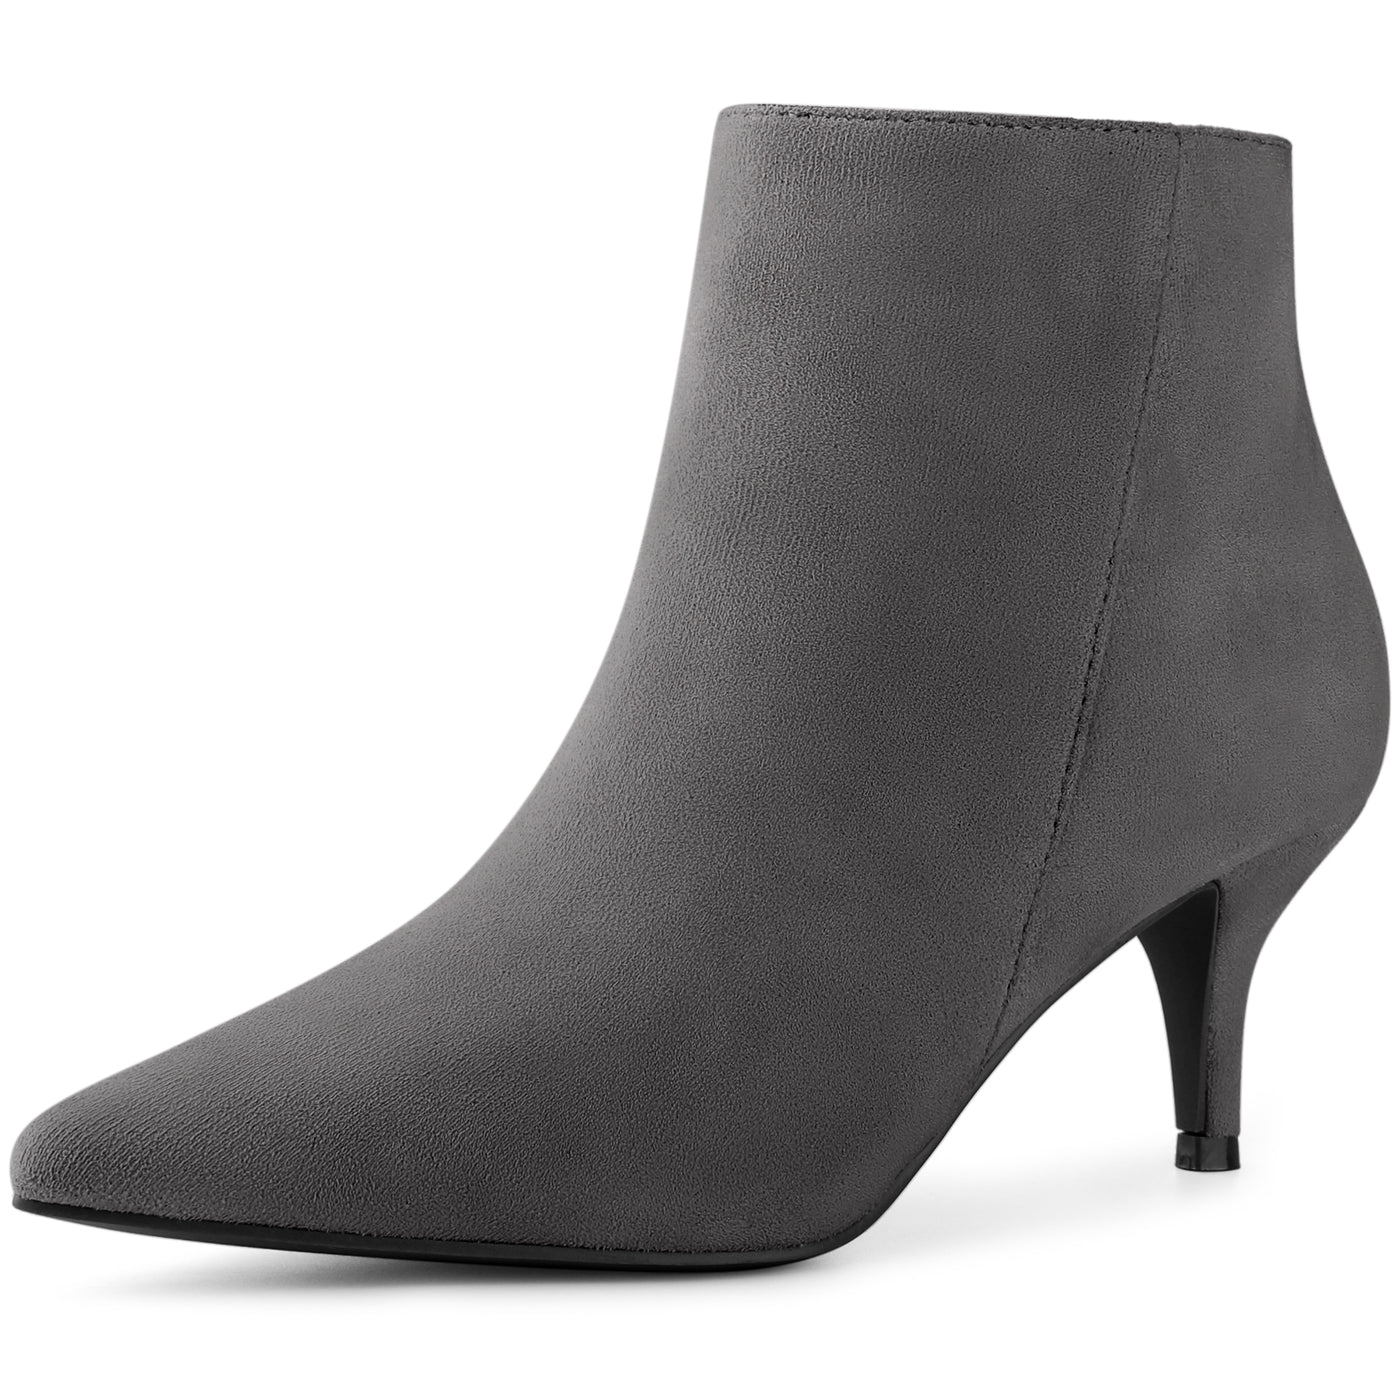 Bublédon Perphy Women's Pointed Toe Side Zip Stiletto Heels Ankle Boots